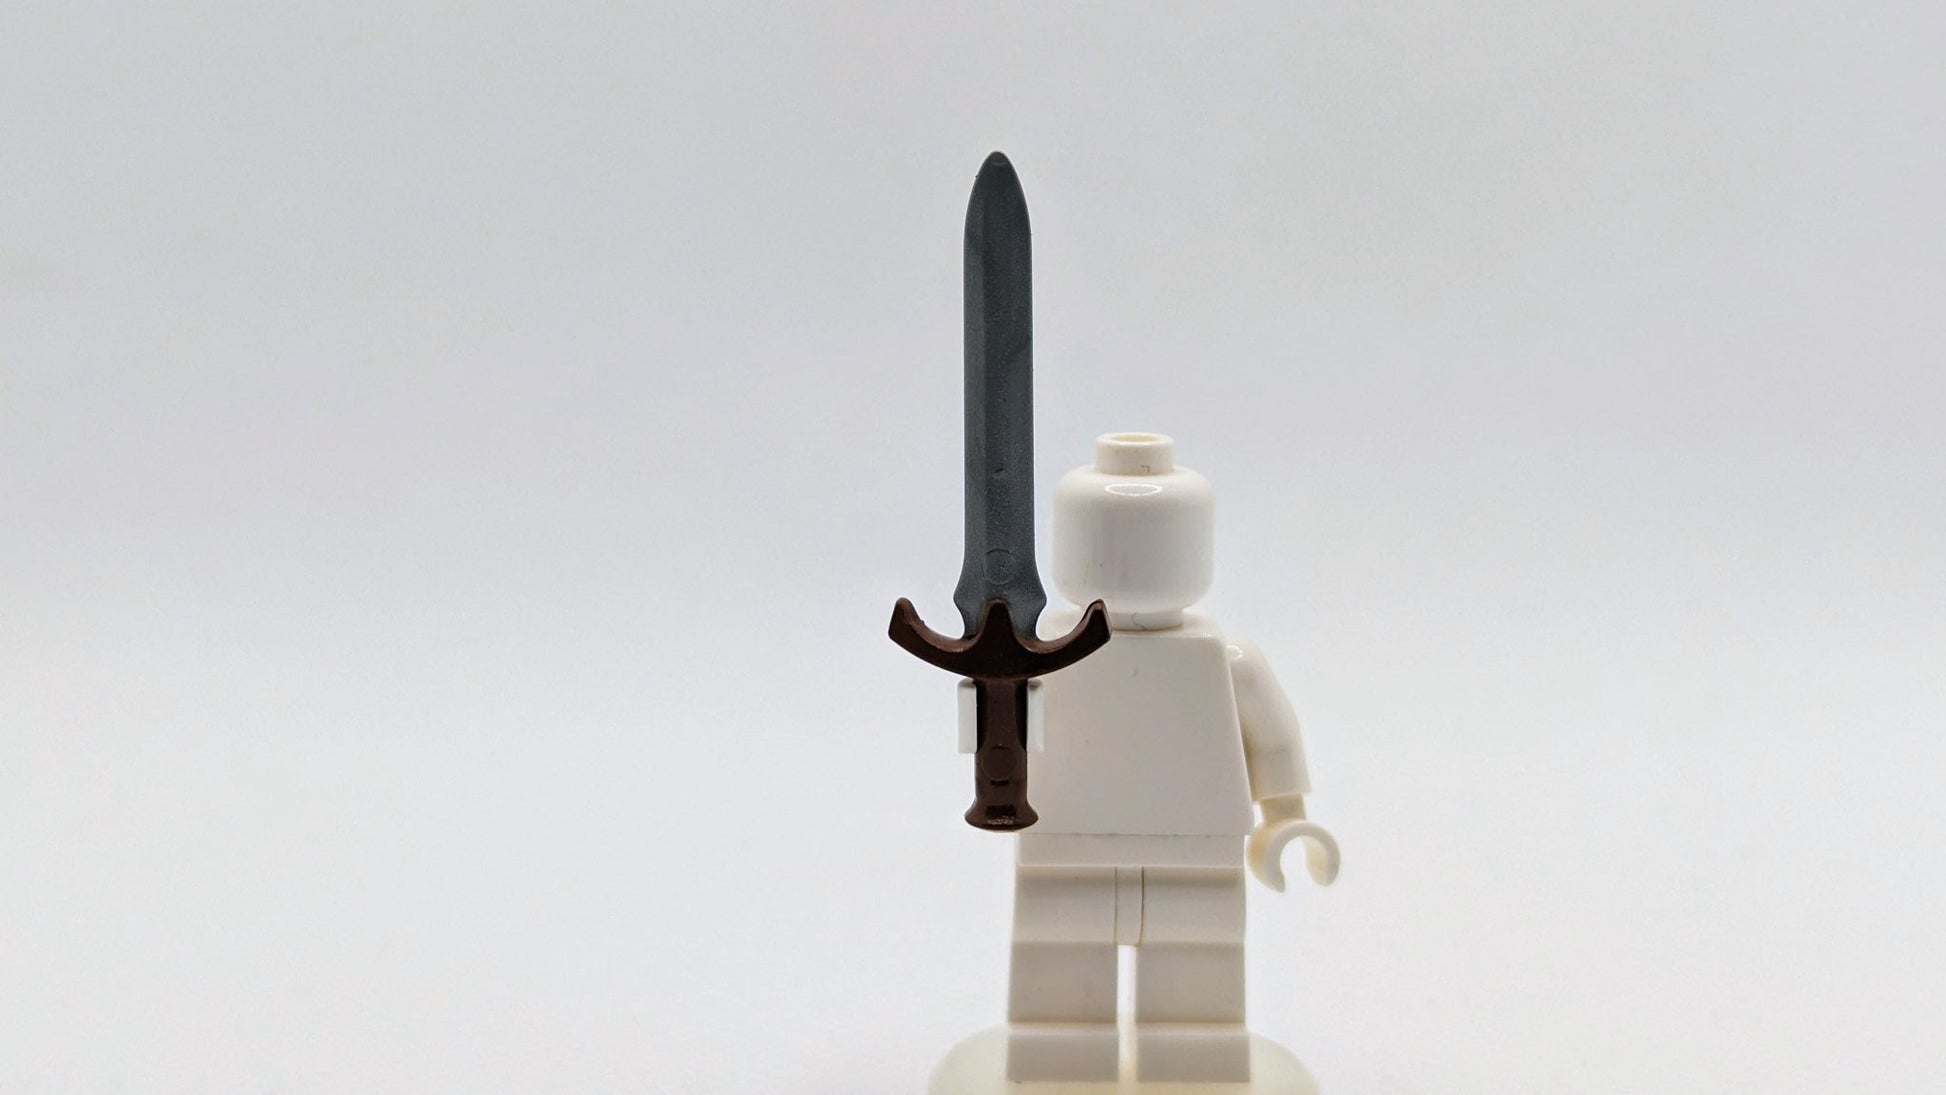 Wizard Sword by Brick Forge - RPGminifigs